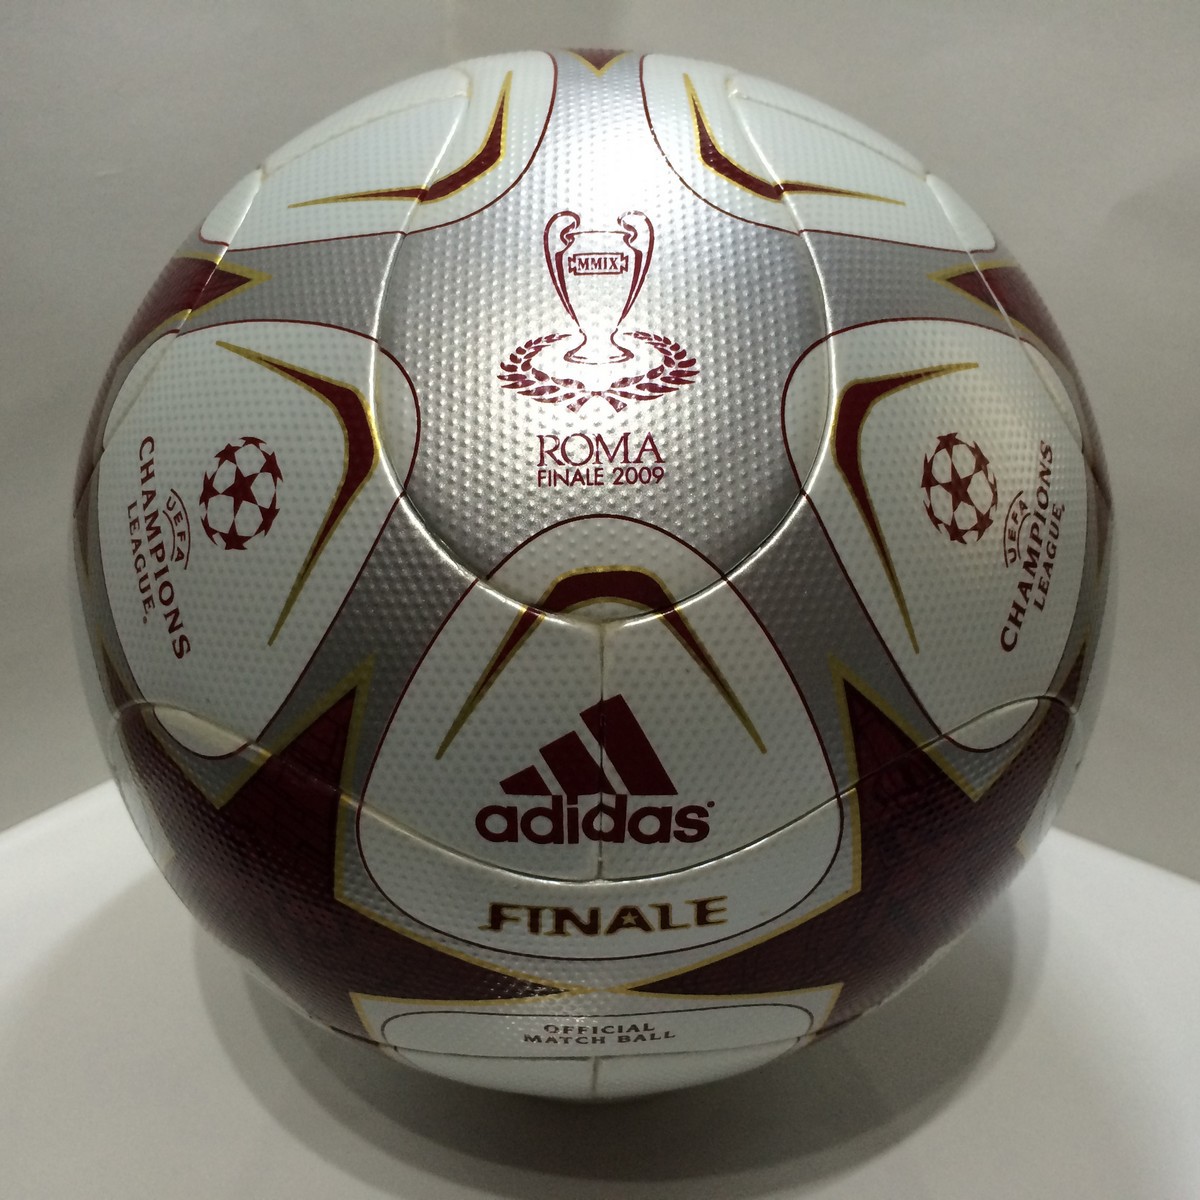 World's most expensive football: £4,000 Louis Vuitton ball savaged in review